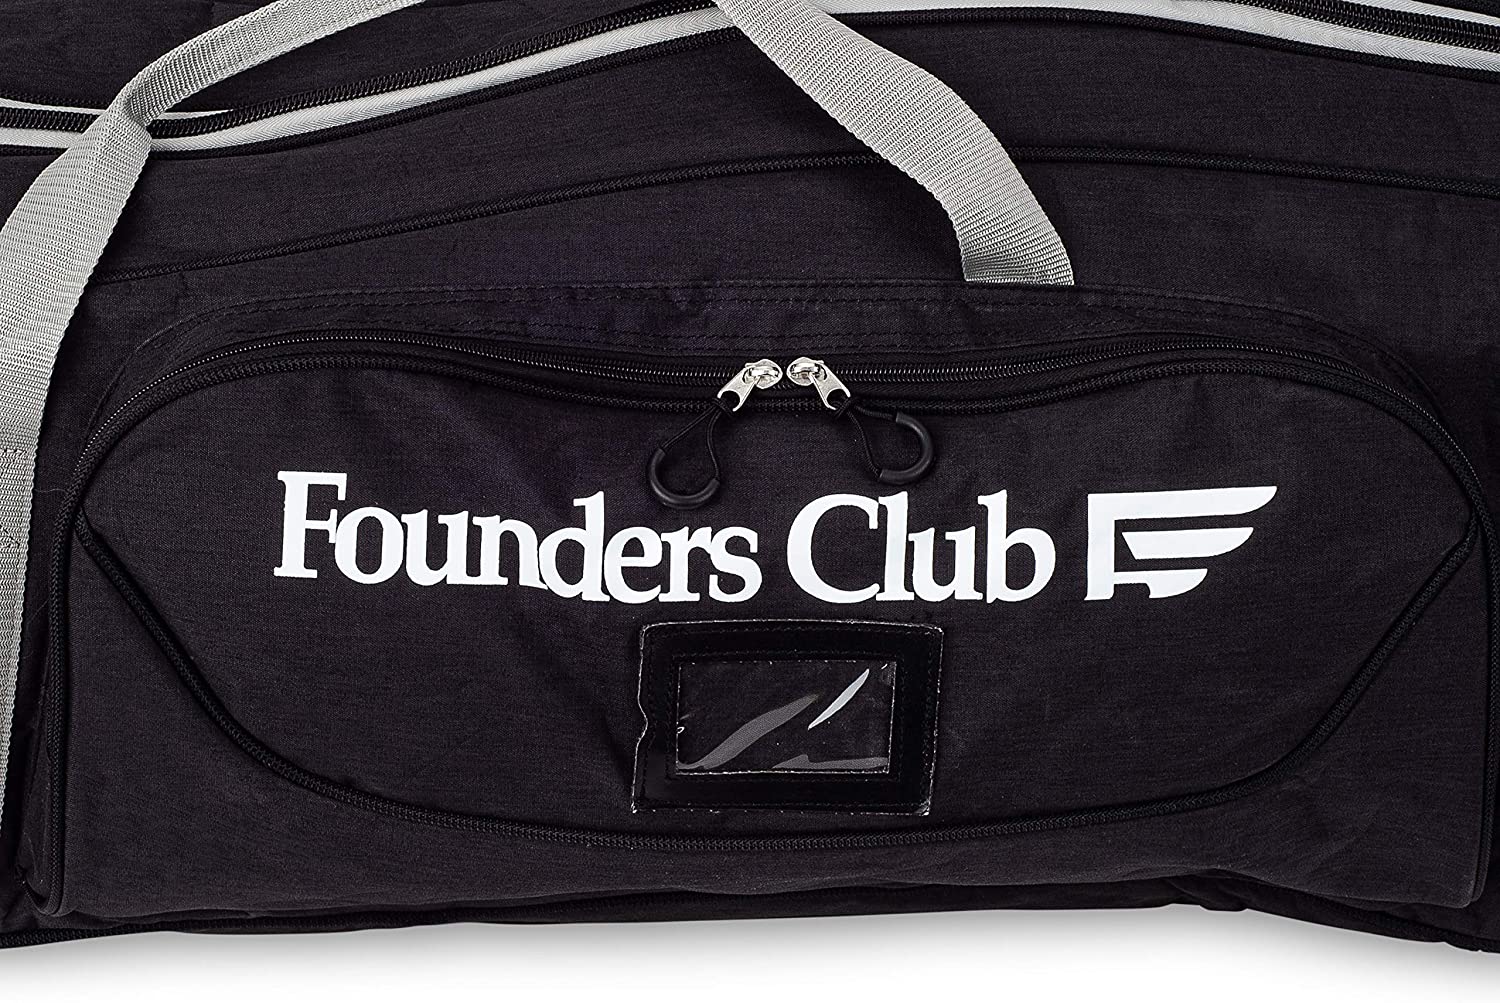 Founders Club Golf Travel Cover Luggage for Golf Clubs with ABS Hard Shell Top Travel Bag